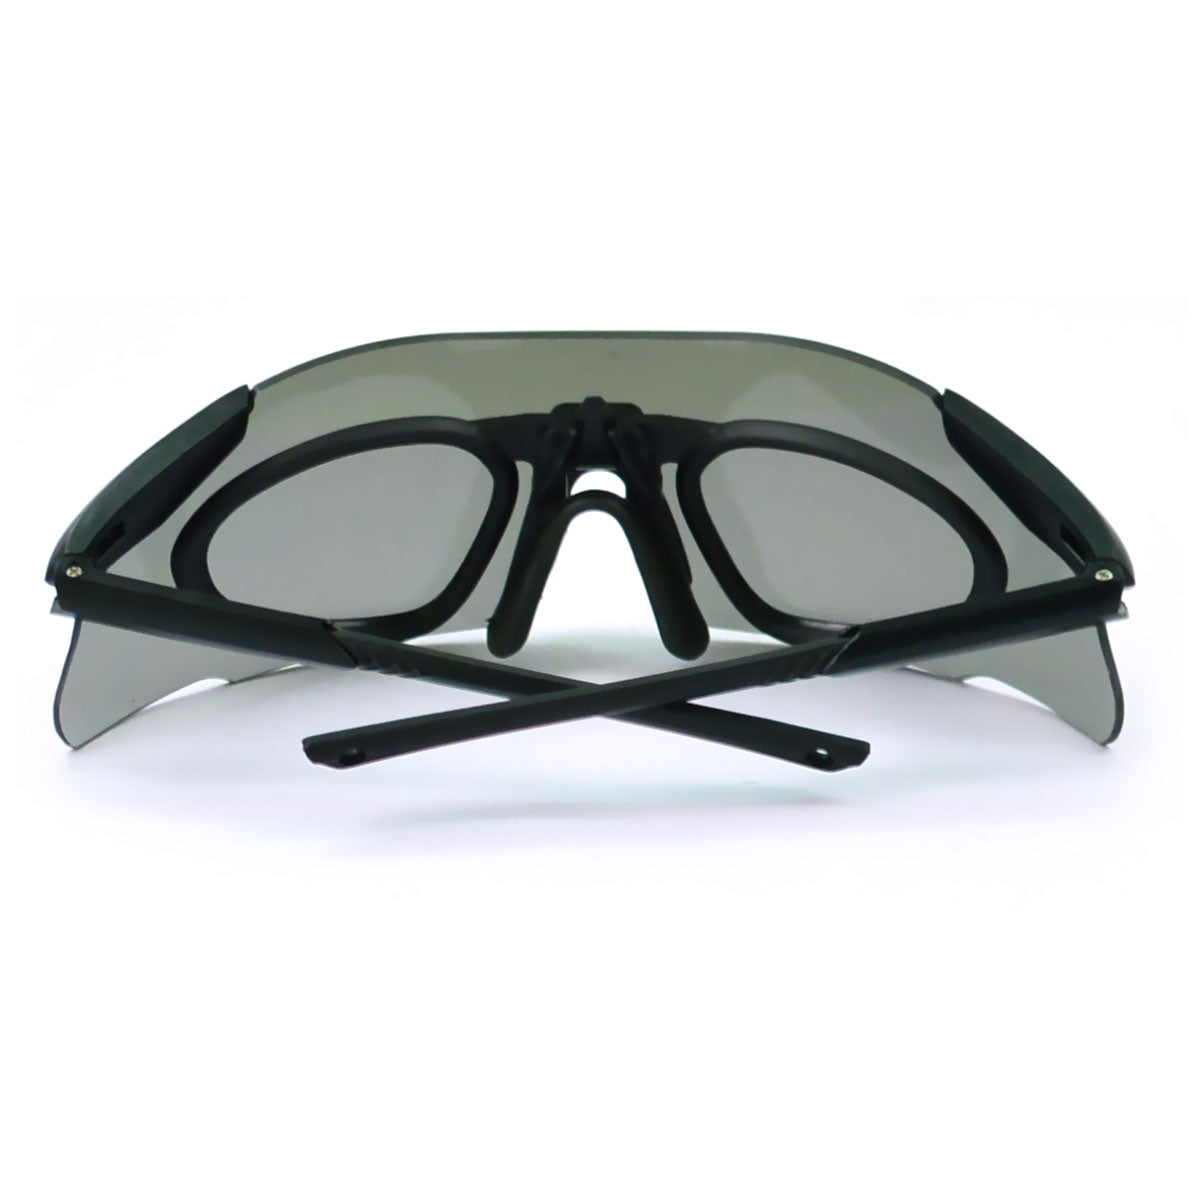 Ultra light thin temple cycling sunglasses with 3 interchangeable color lenses